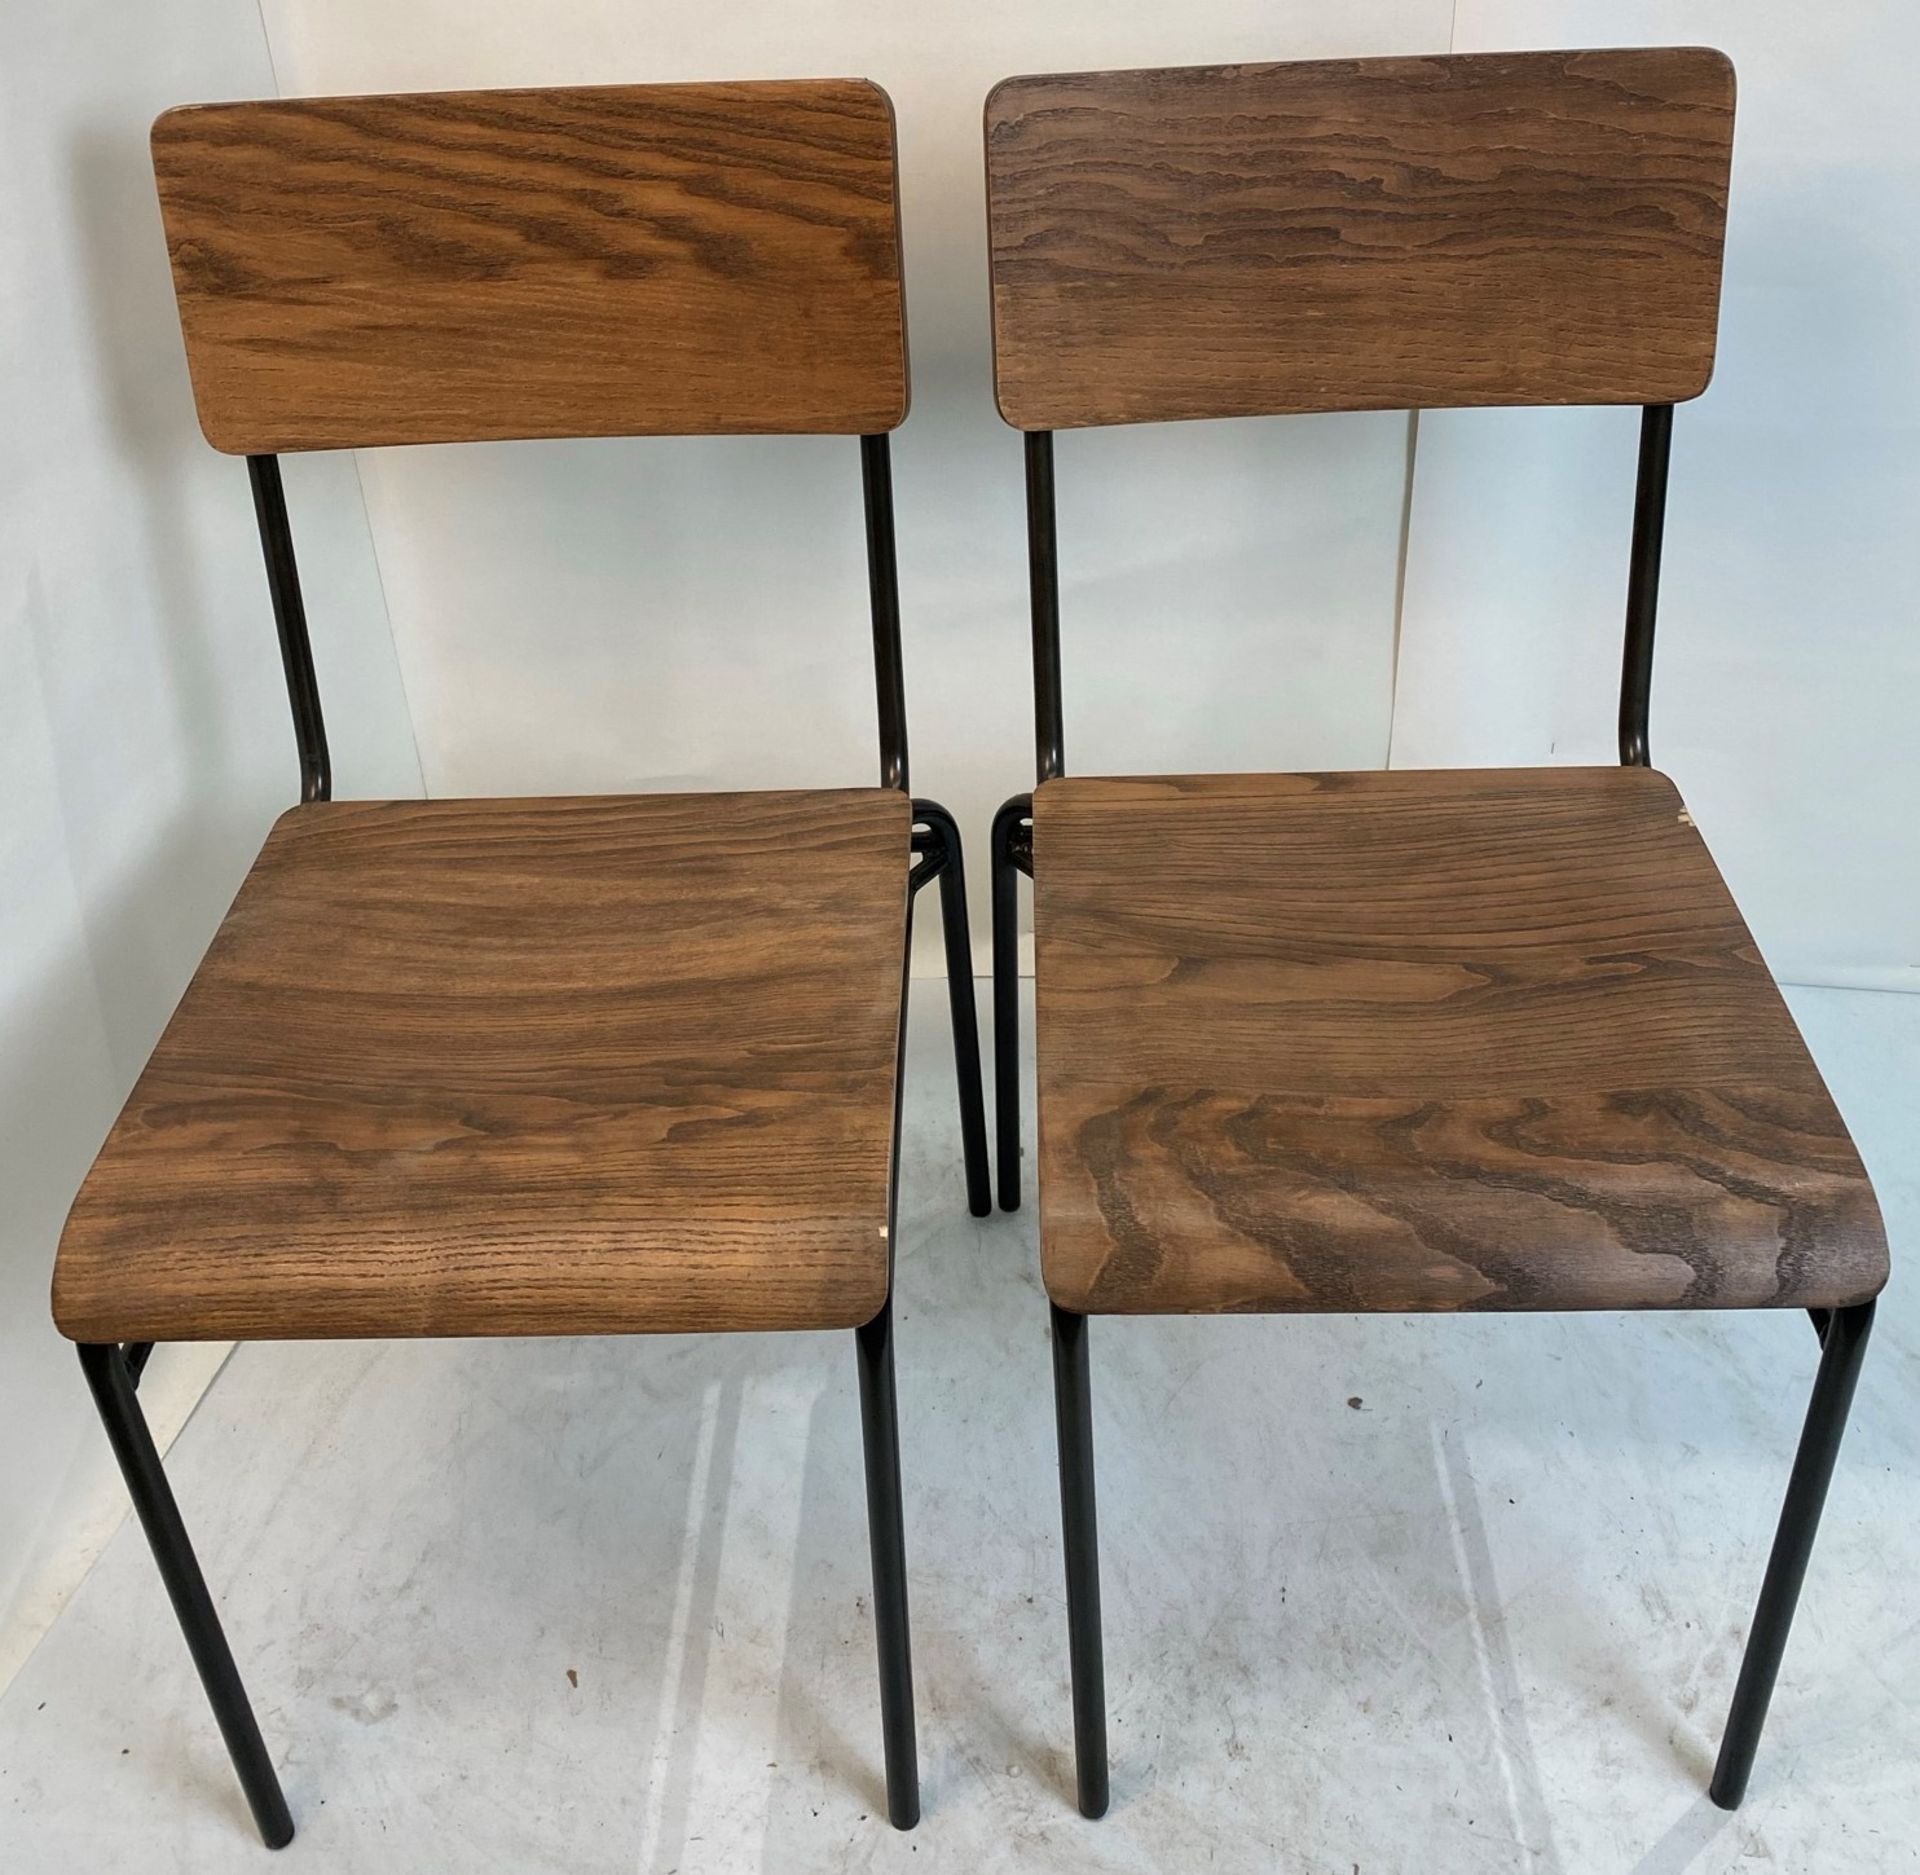 2 x Dark wood effect stacking chairs with black metal frames - Pleae note slight chip to rear right - Image 2 of 4